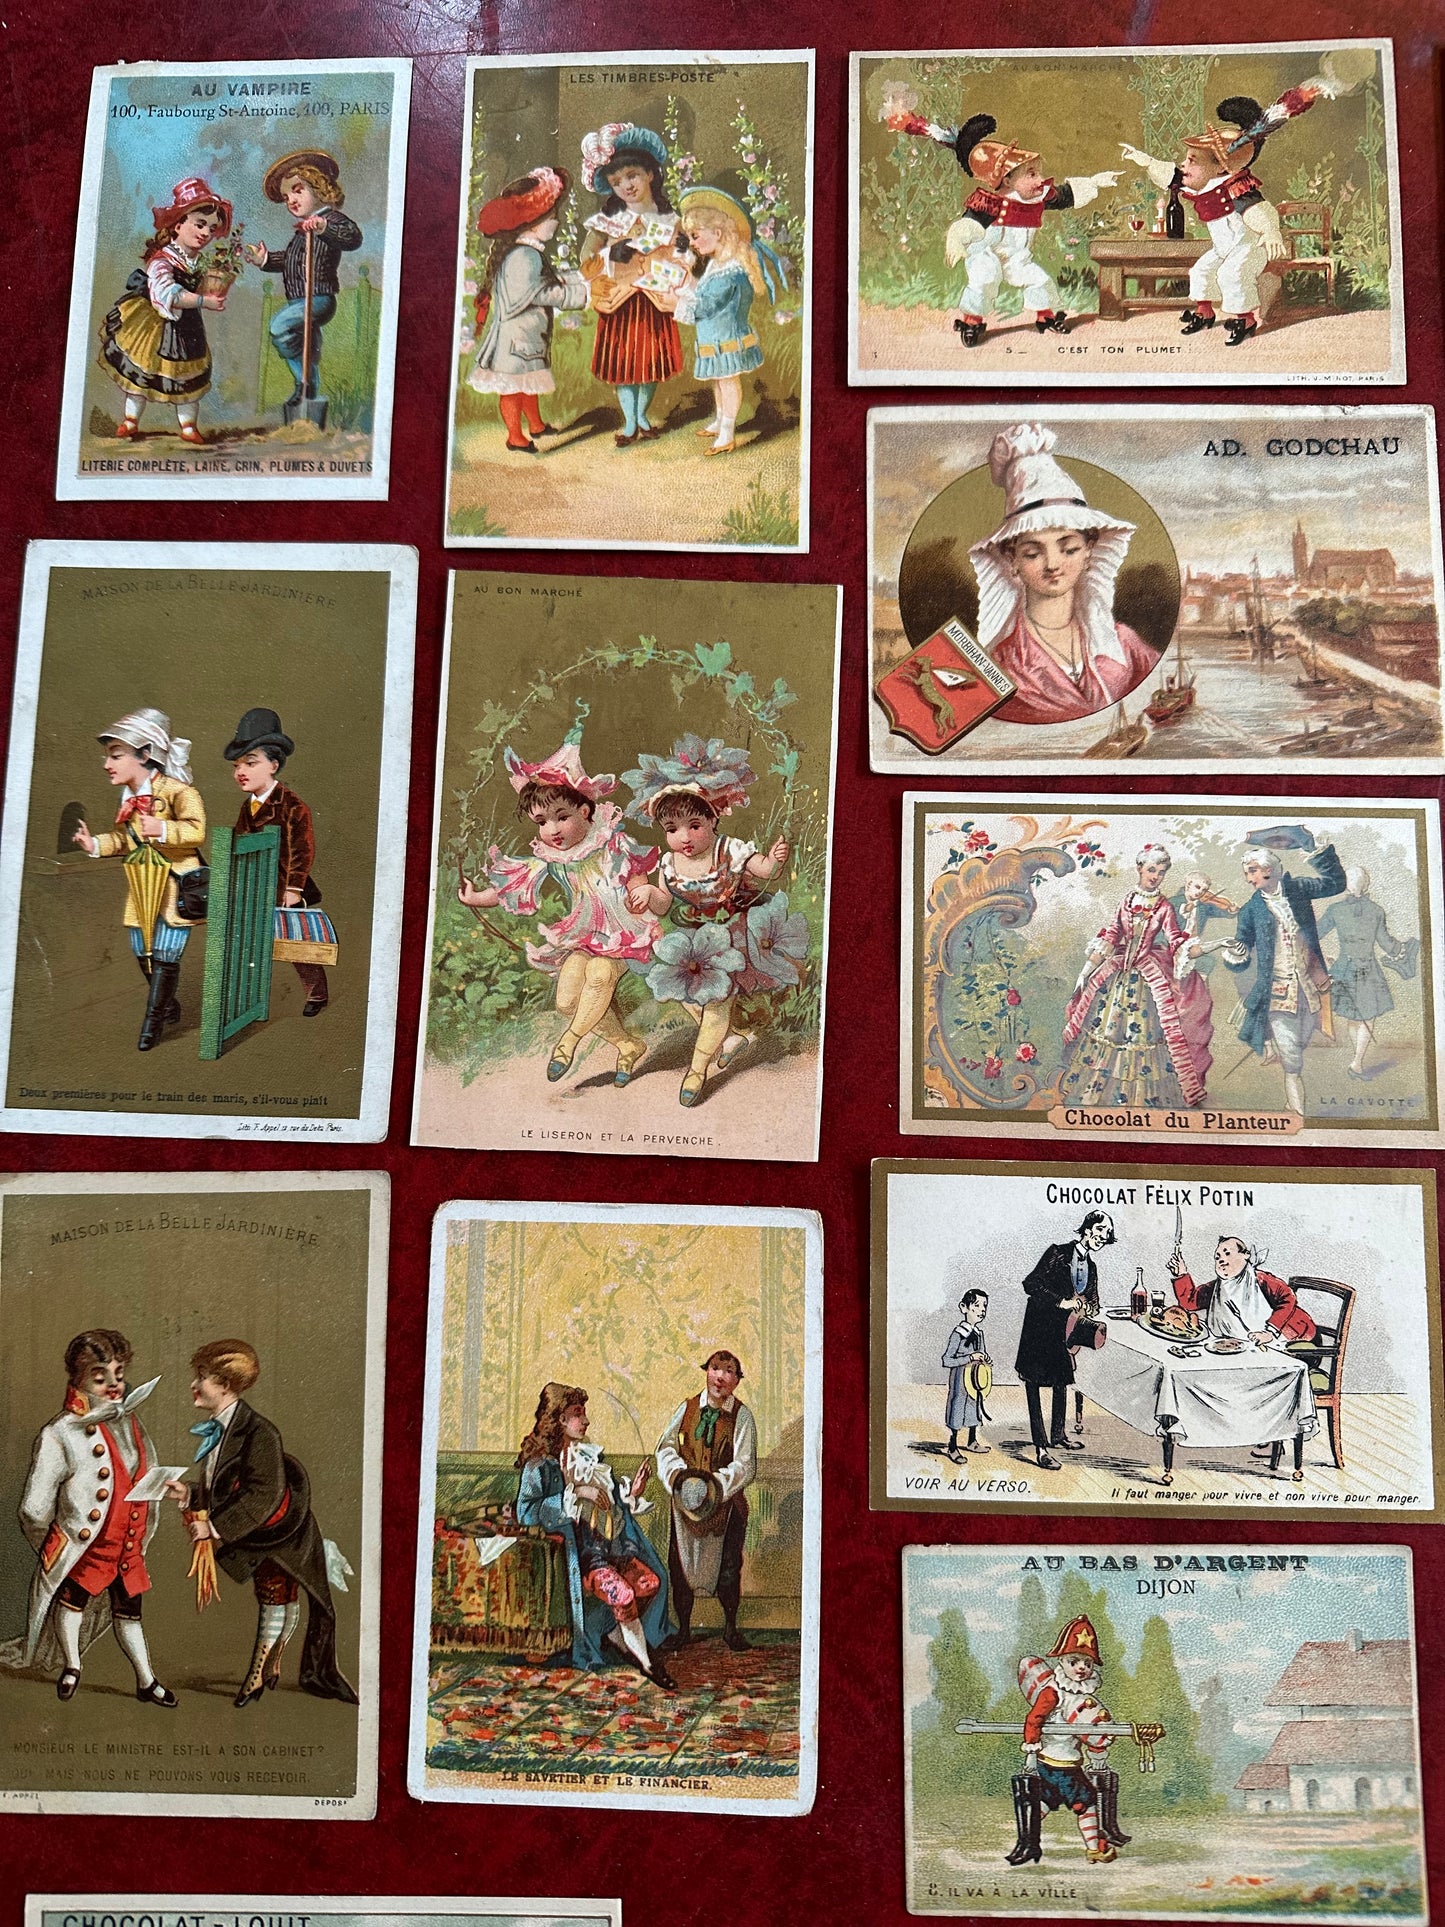 Collection of 17 French trade cards + One large album decoupage cut (1880s-1890s)